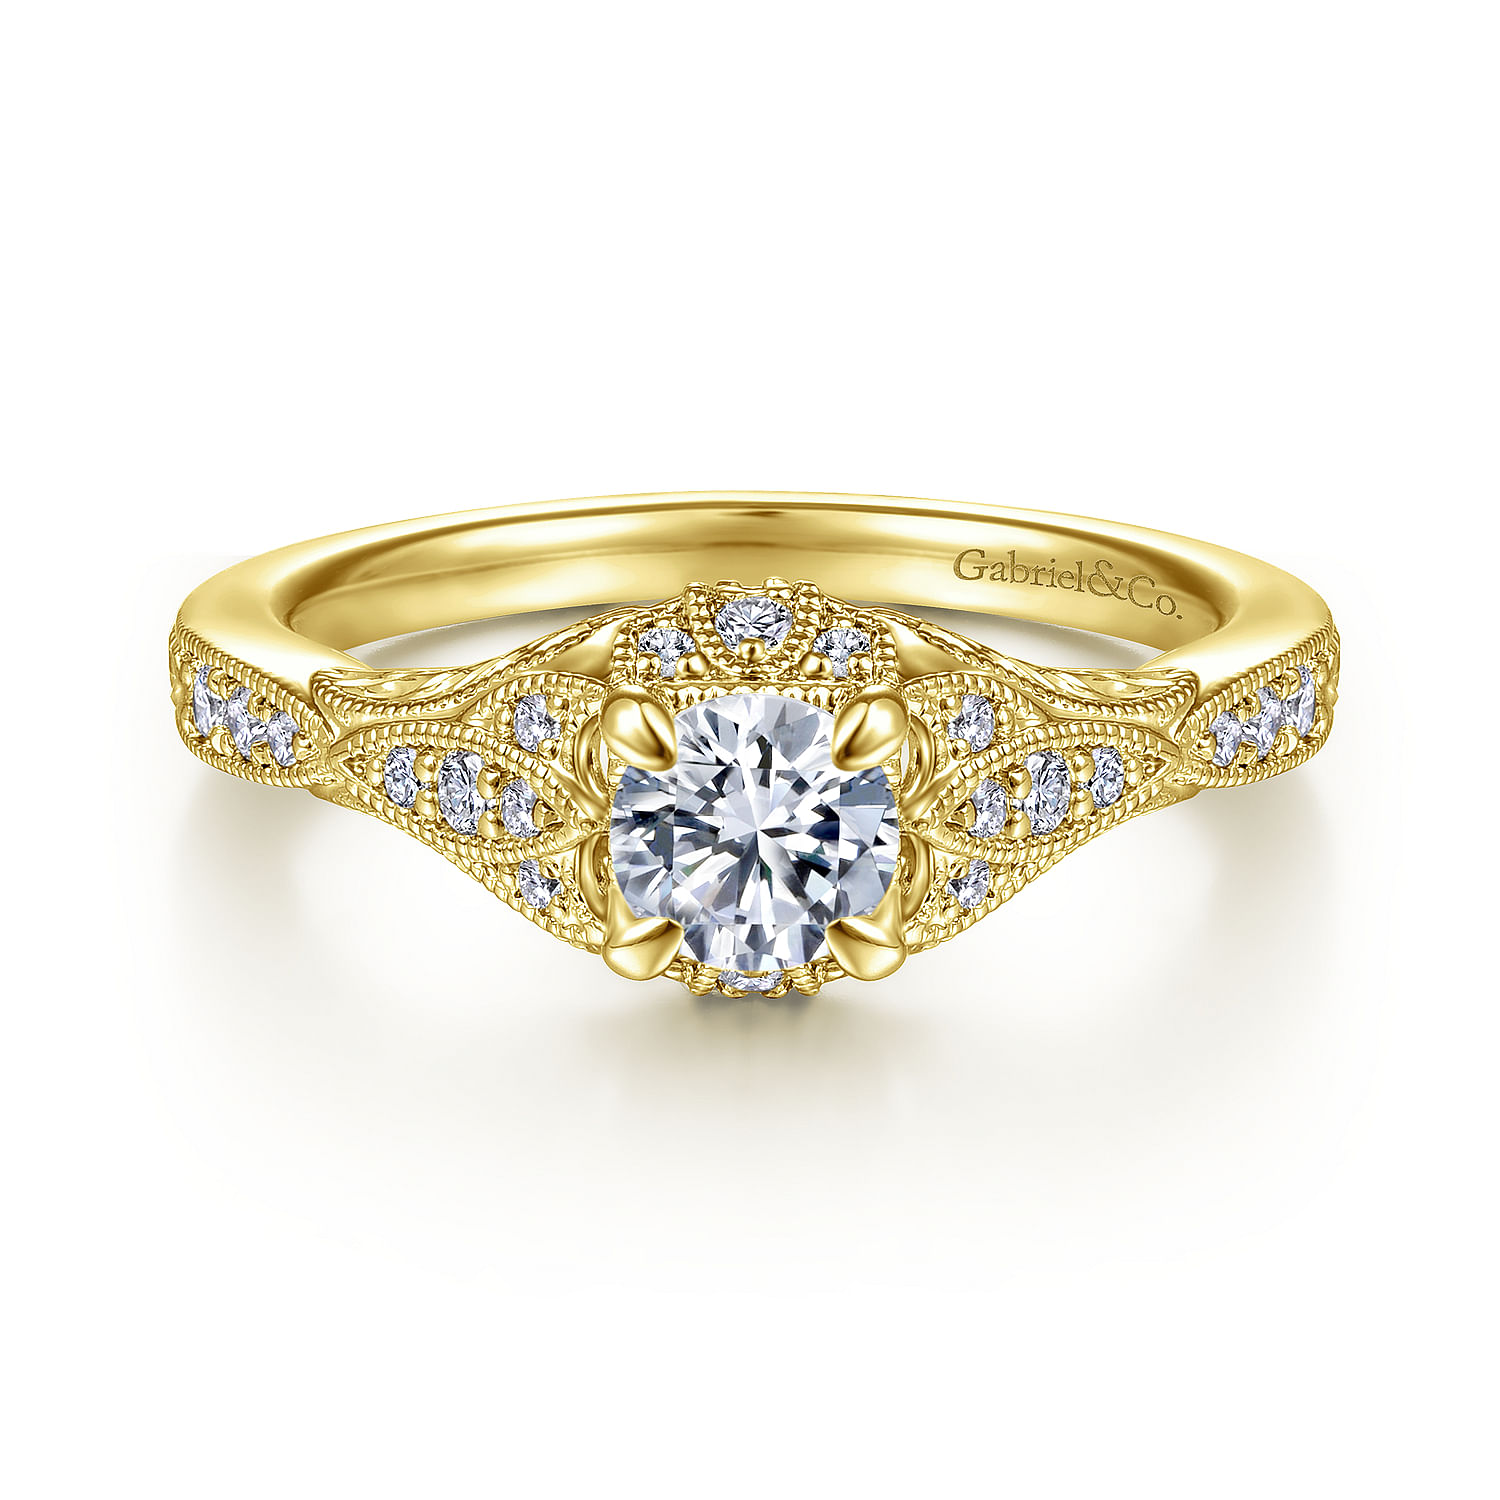 Iona - Vintage Inspired 14K Yellow Gold Round Halo Complete Diamond Engagement Ring